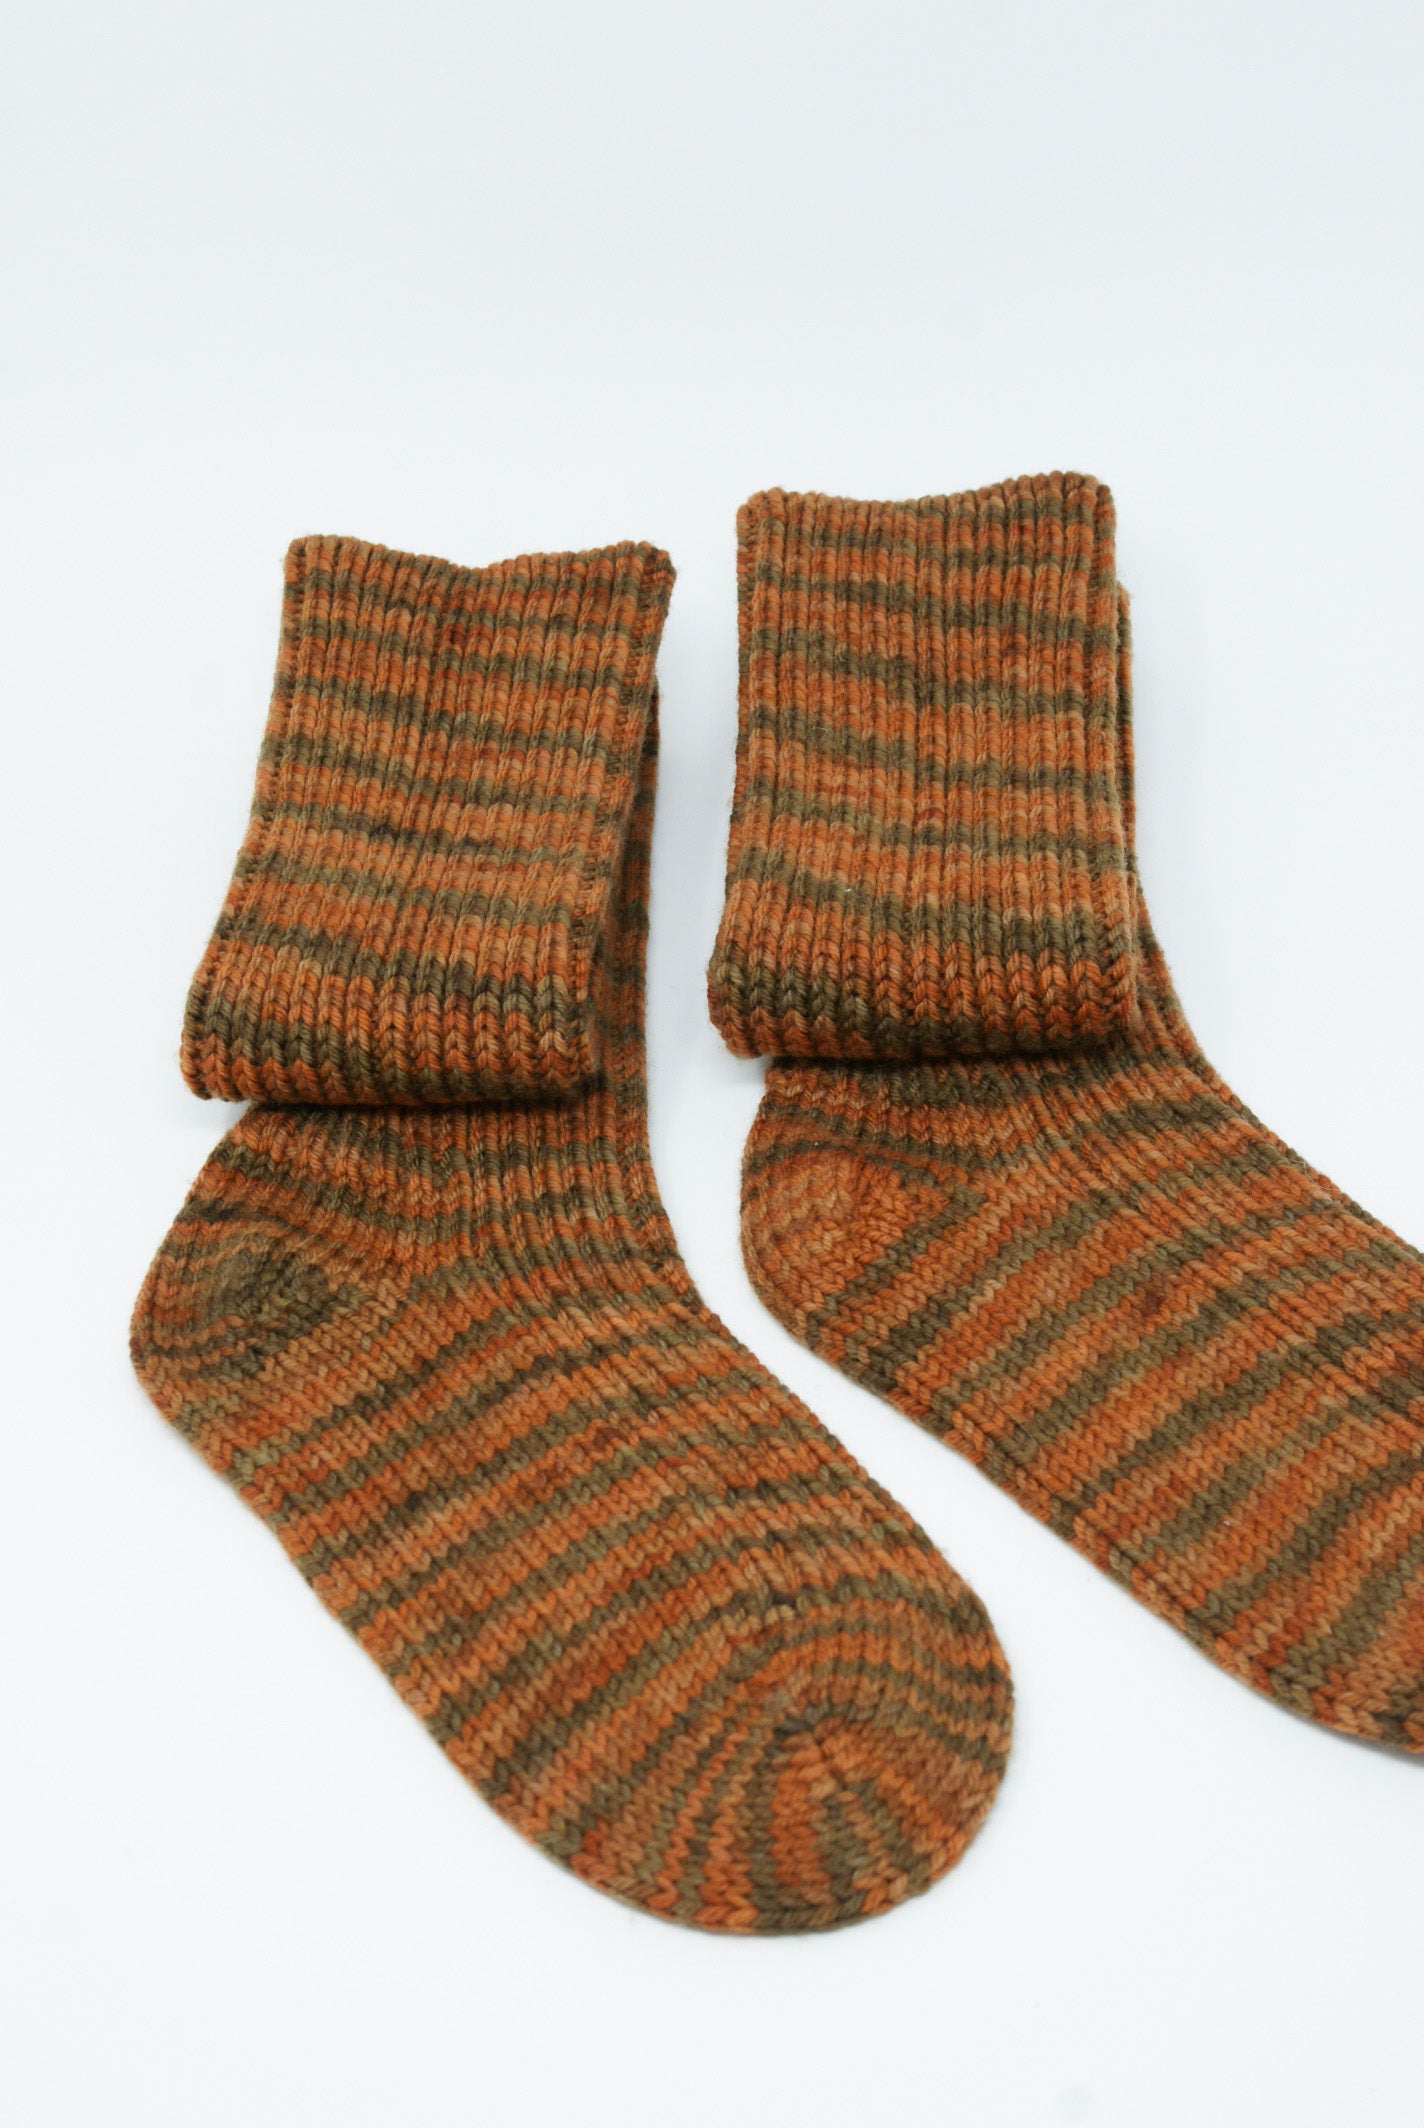 A pair of Misha & Puff Long Wool Socks in Gingerbread Space Dye made with soft merino wool, displayed on a clean white background.